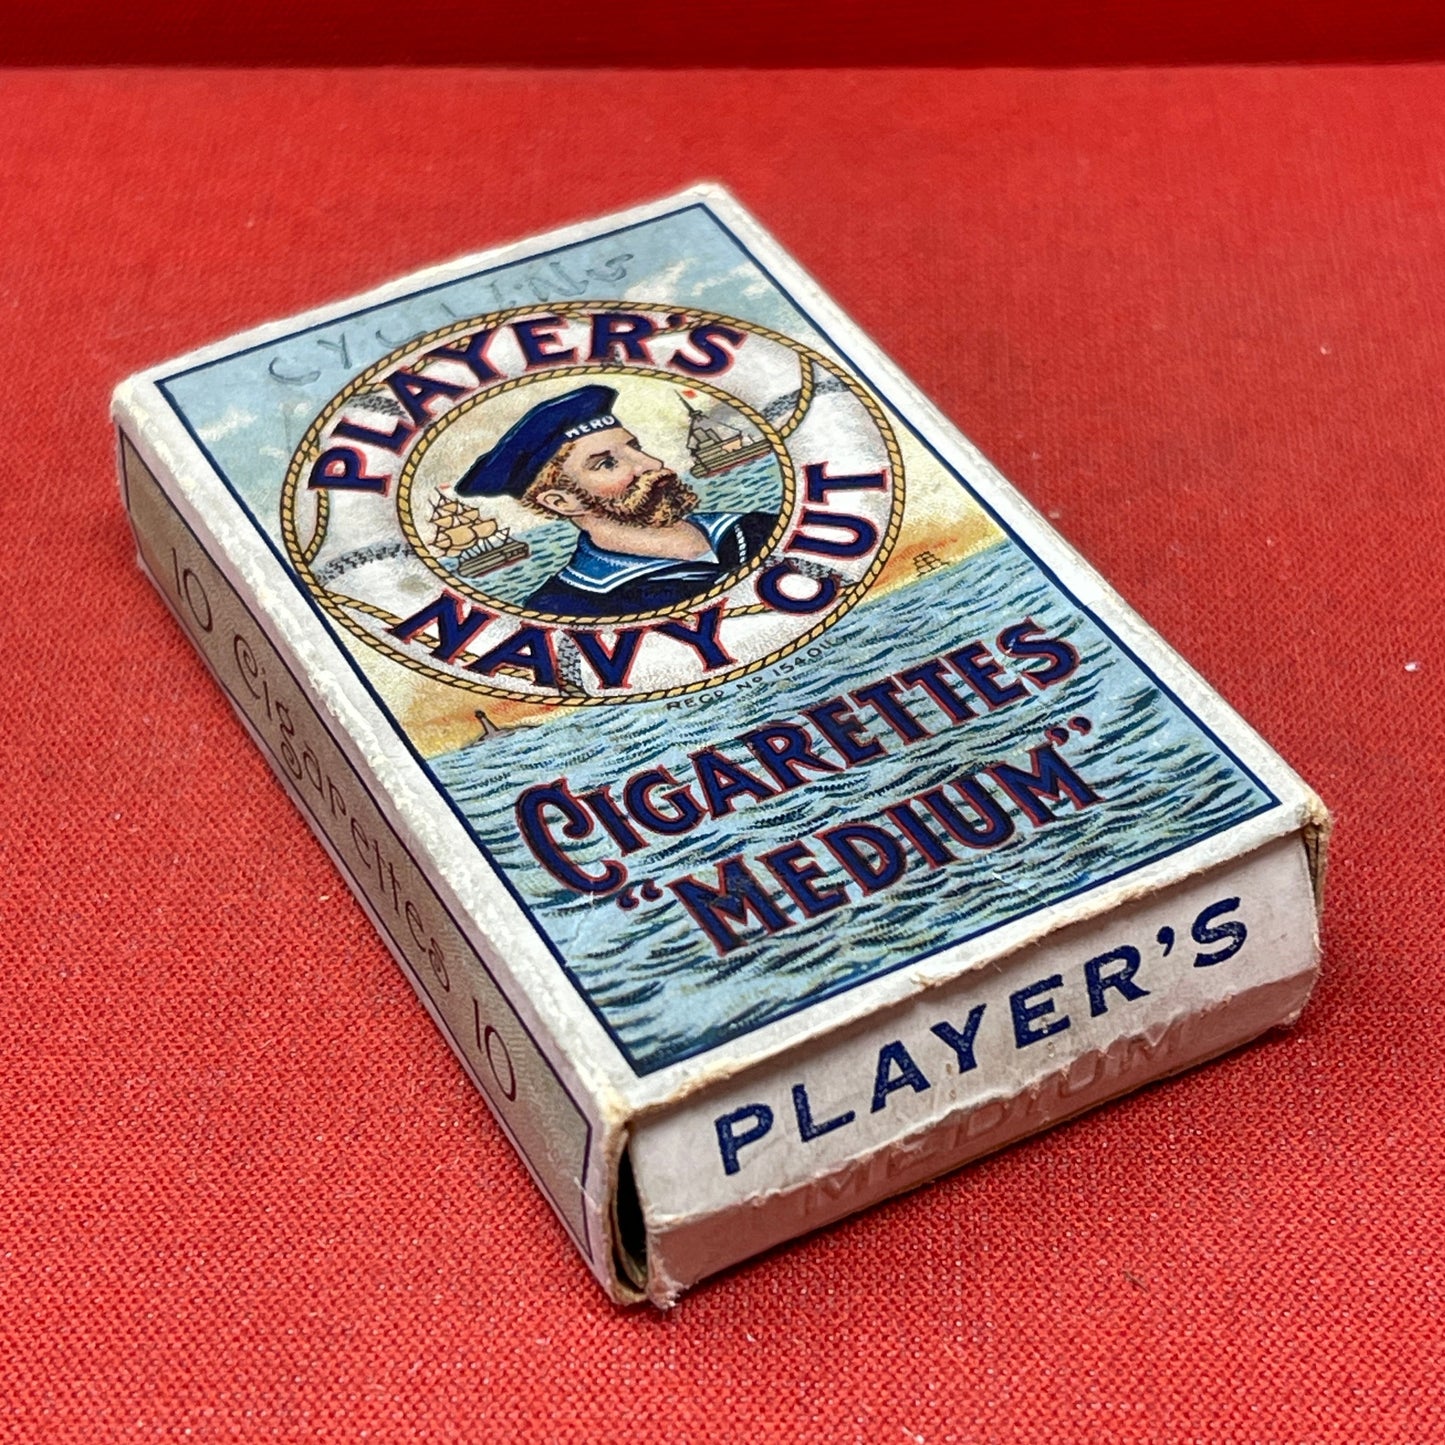 An empty packet for 10 Player's Medium Navy Cut cigarettes. The front has an ocean scene and a sailor framed in a life belt.